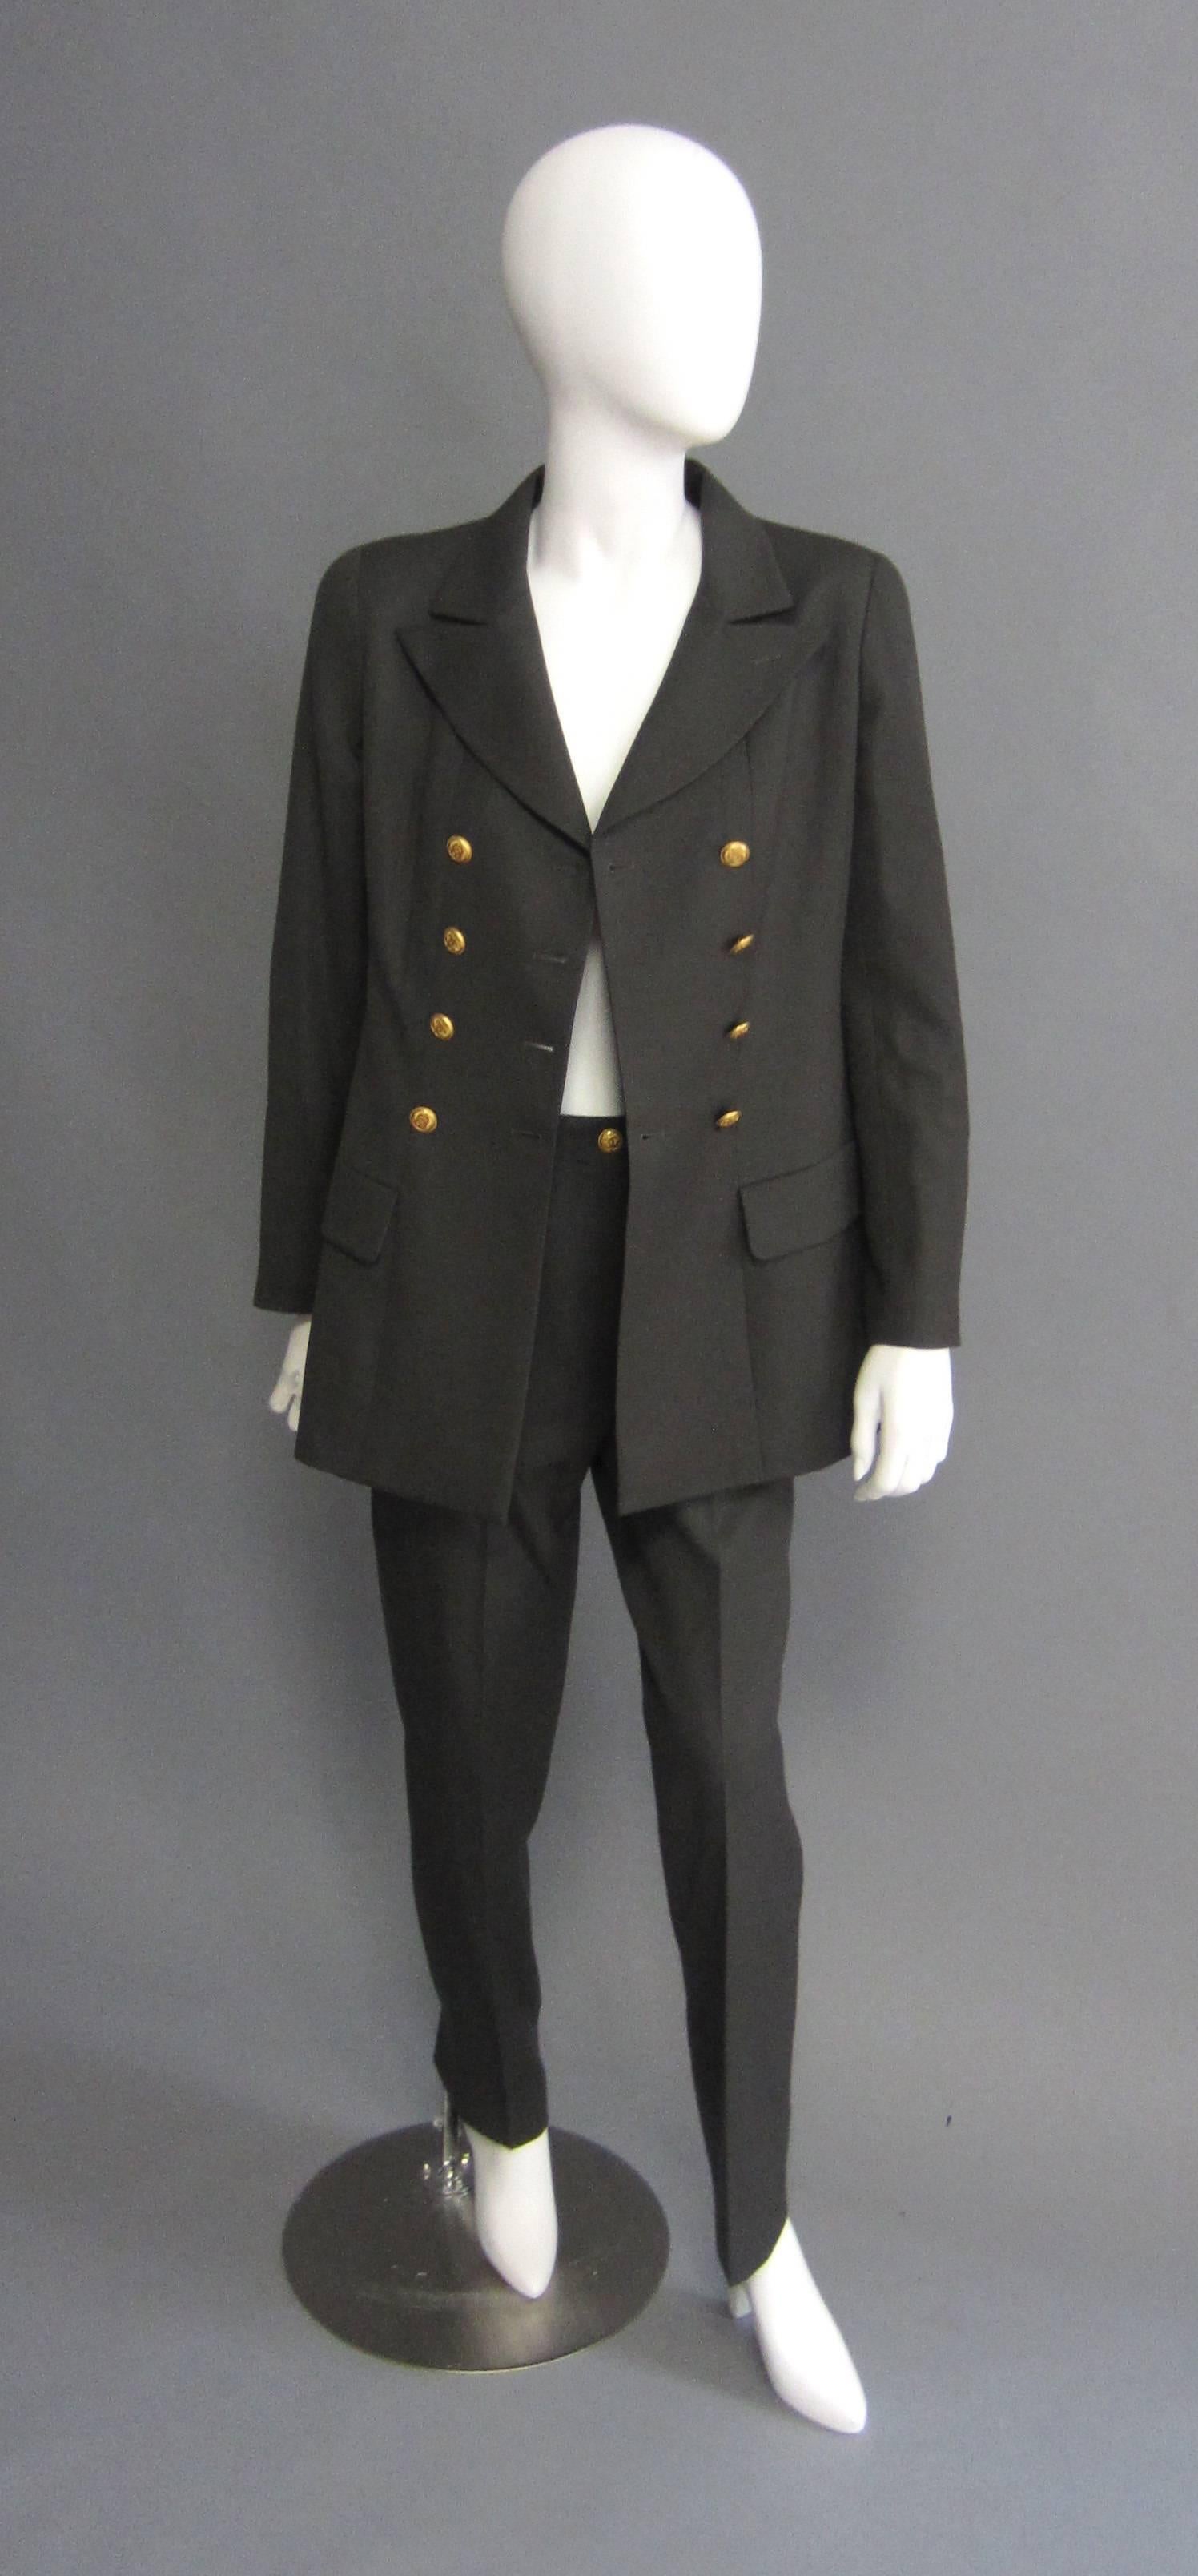 1996 CHANEL Dark Green Pant Suit with Gold Button Detail In Excellent Condition For Sale In New York, NY